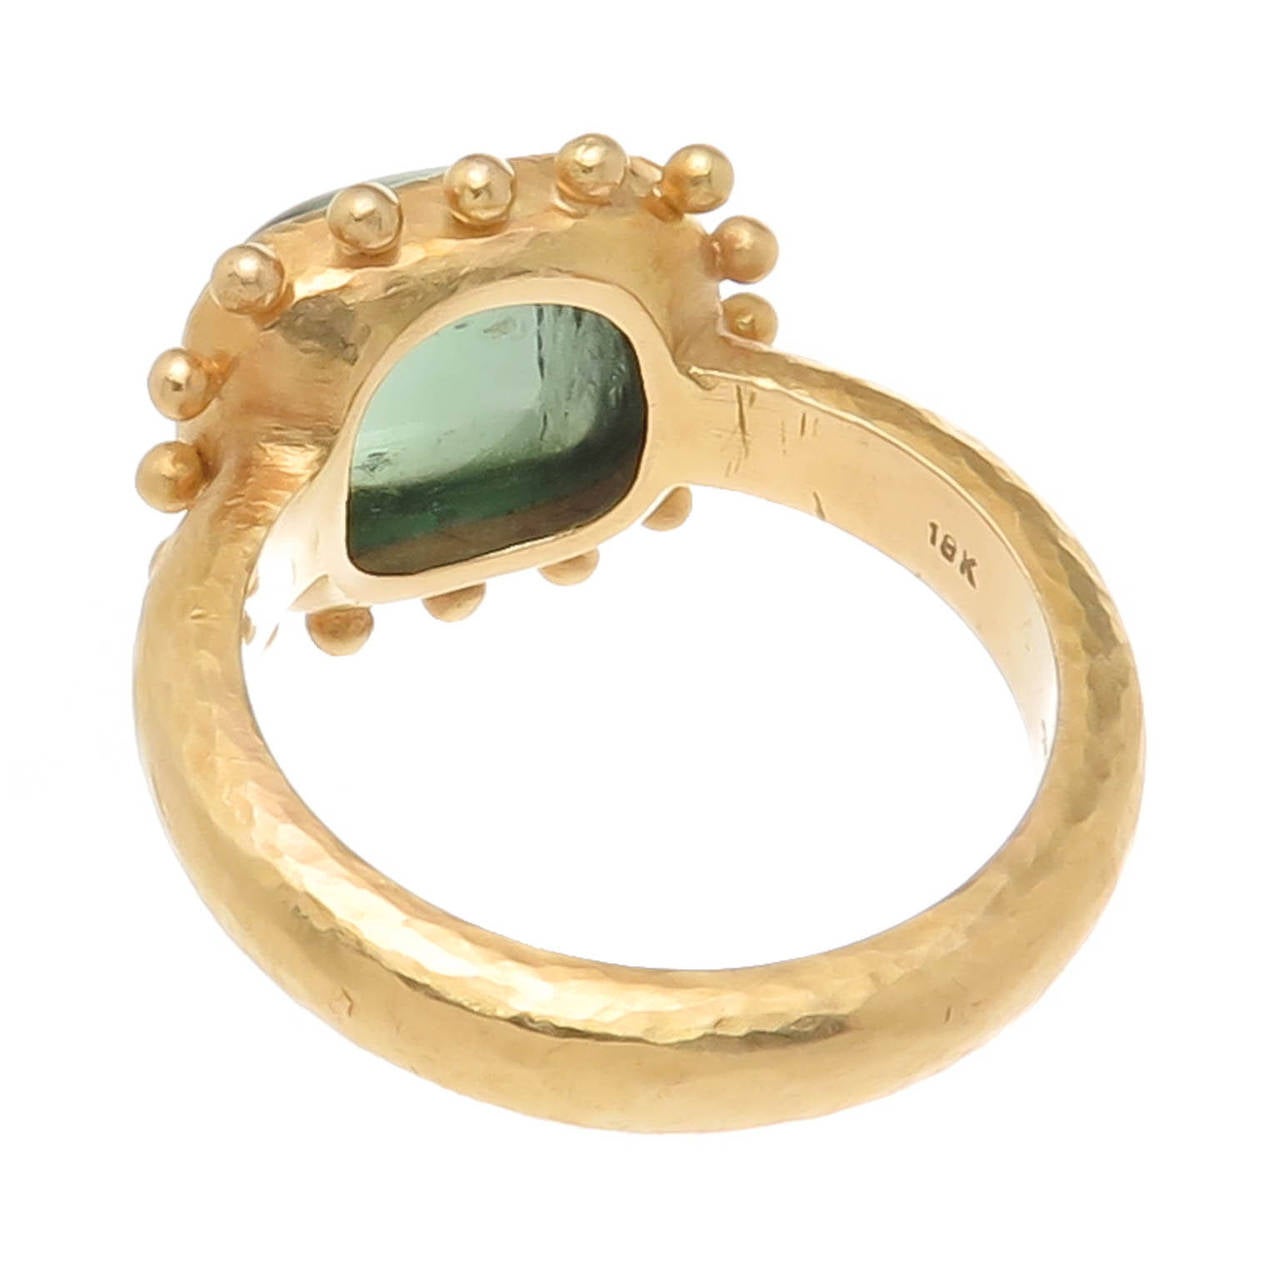 Circa 2010 Elizabeth Locke 18K yellow Gold and Tourmaline Cabochon ring, heavy, hand made and hand Hammered in a Locke's signature style. gem Color Tourmeline measuring 12.5 X 10.5  X  6.8 totaling 7 carats. Finger Size = 10.5